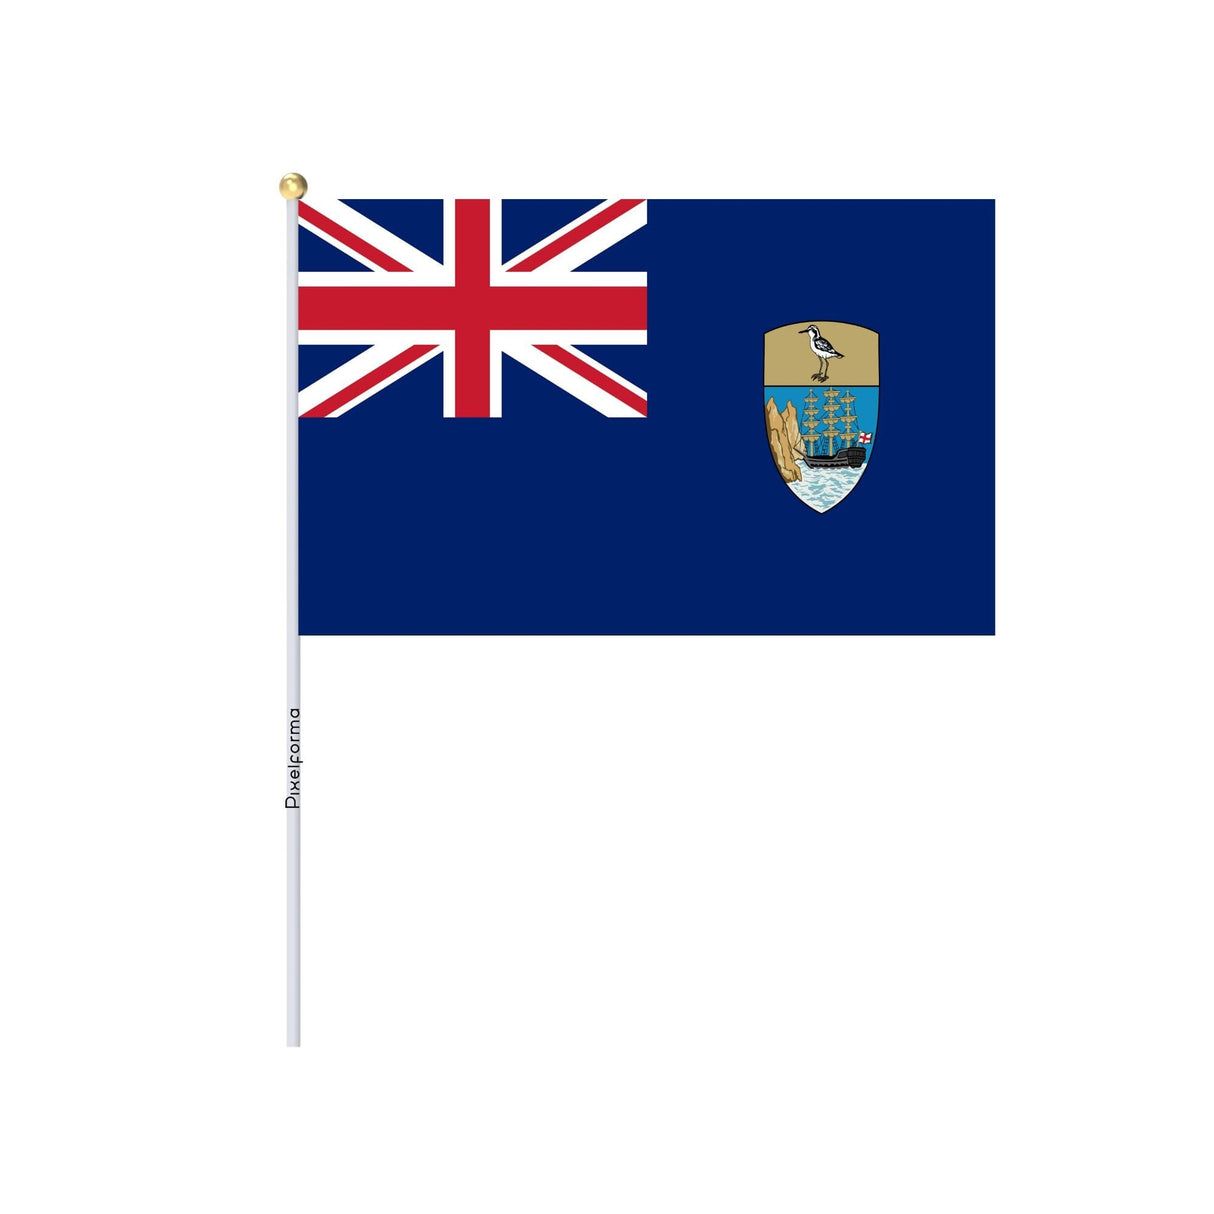 Mini Flag of St. Helena, Ascension and Tristan da Cunha Bundles in several sizes - Pixelforma